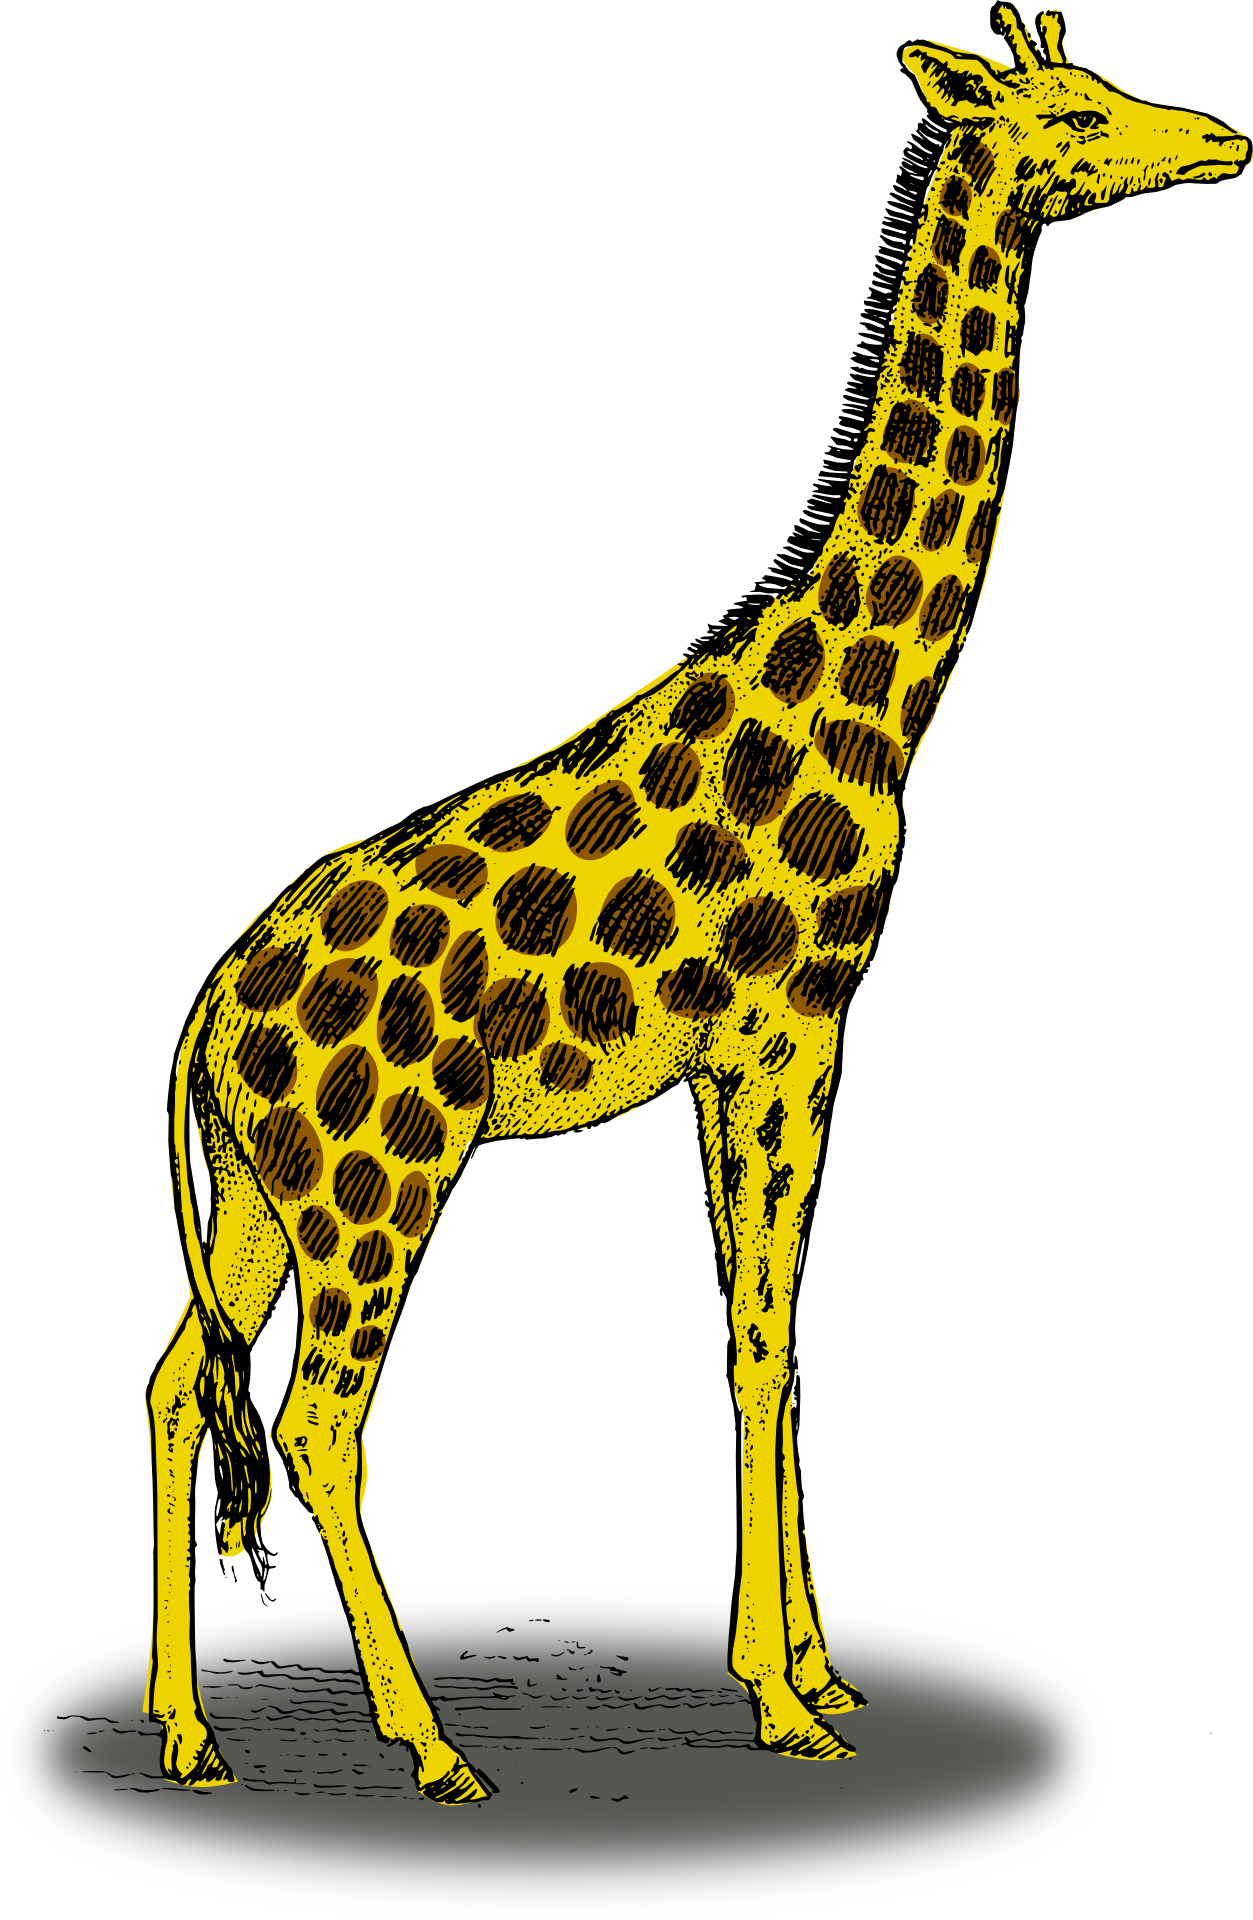 Drawing yellow giraffe with brown spots free image